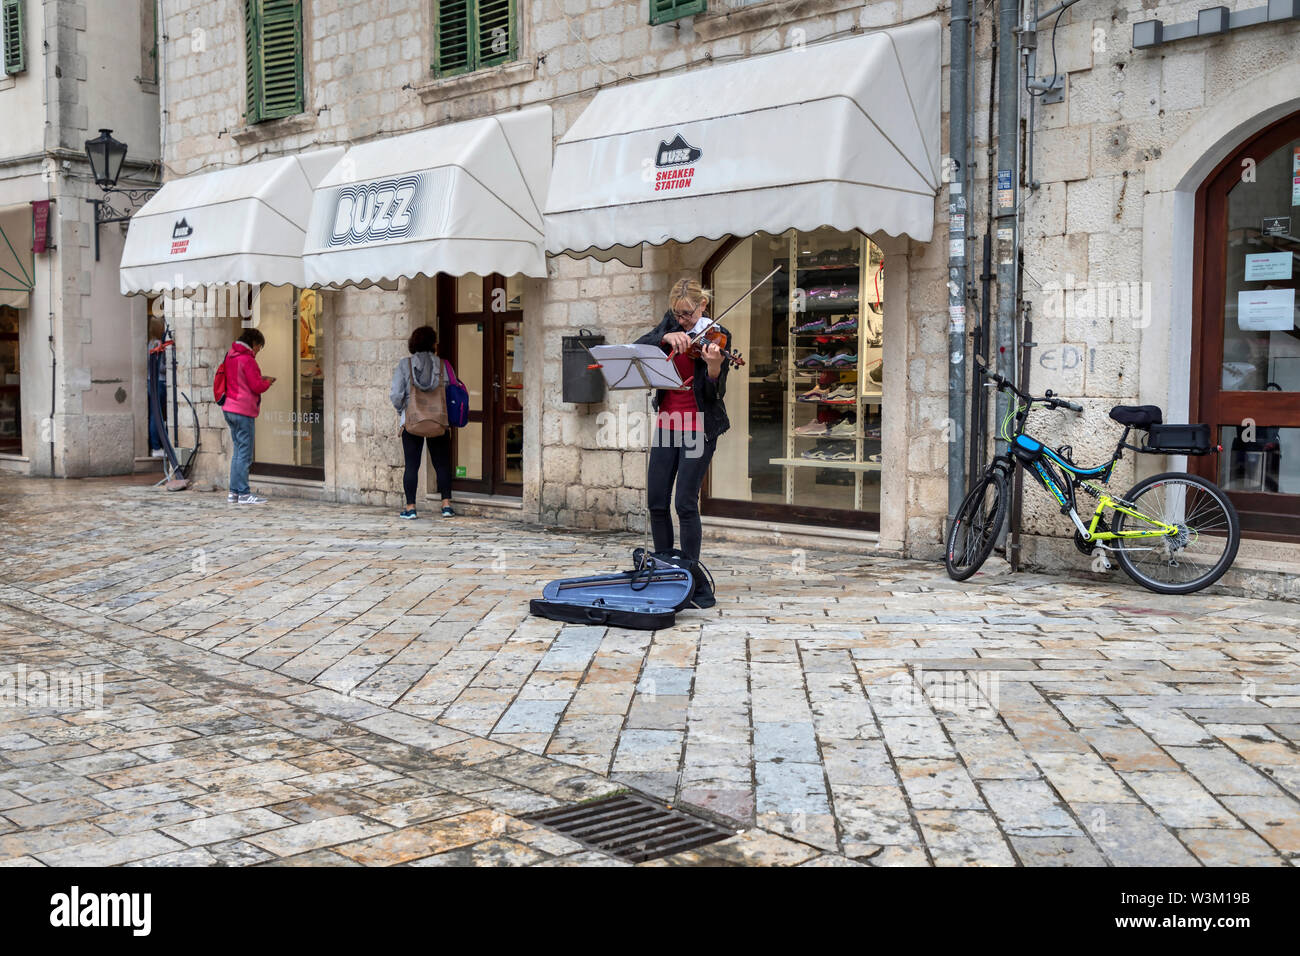 Montenegro, April 30th 2019: A woman violinist busking in the Old Town of Kotor Stock Photo